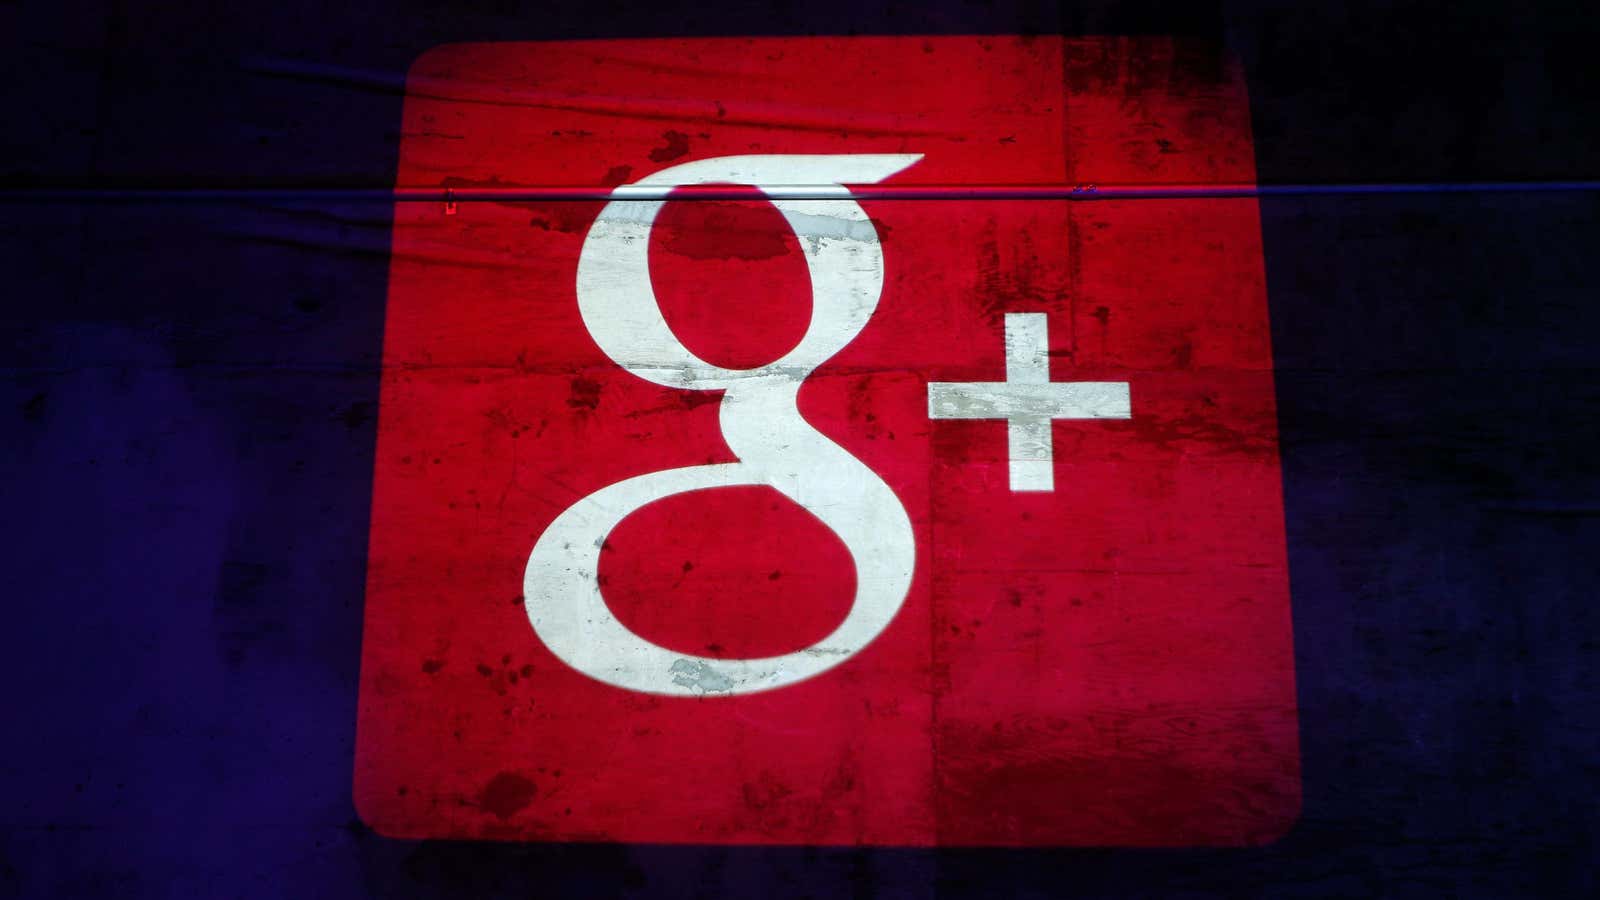 Google+ is on its way out.